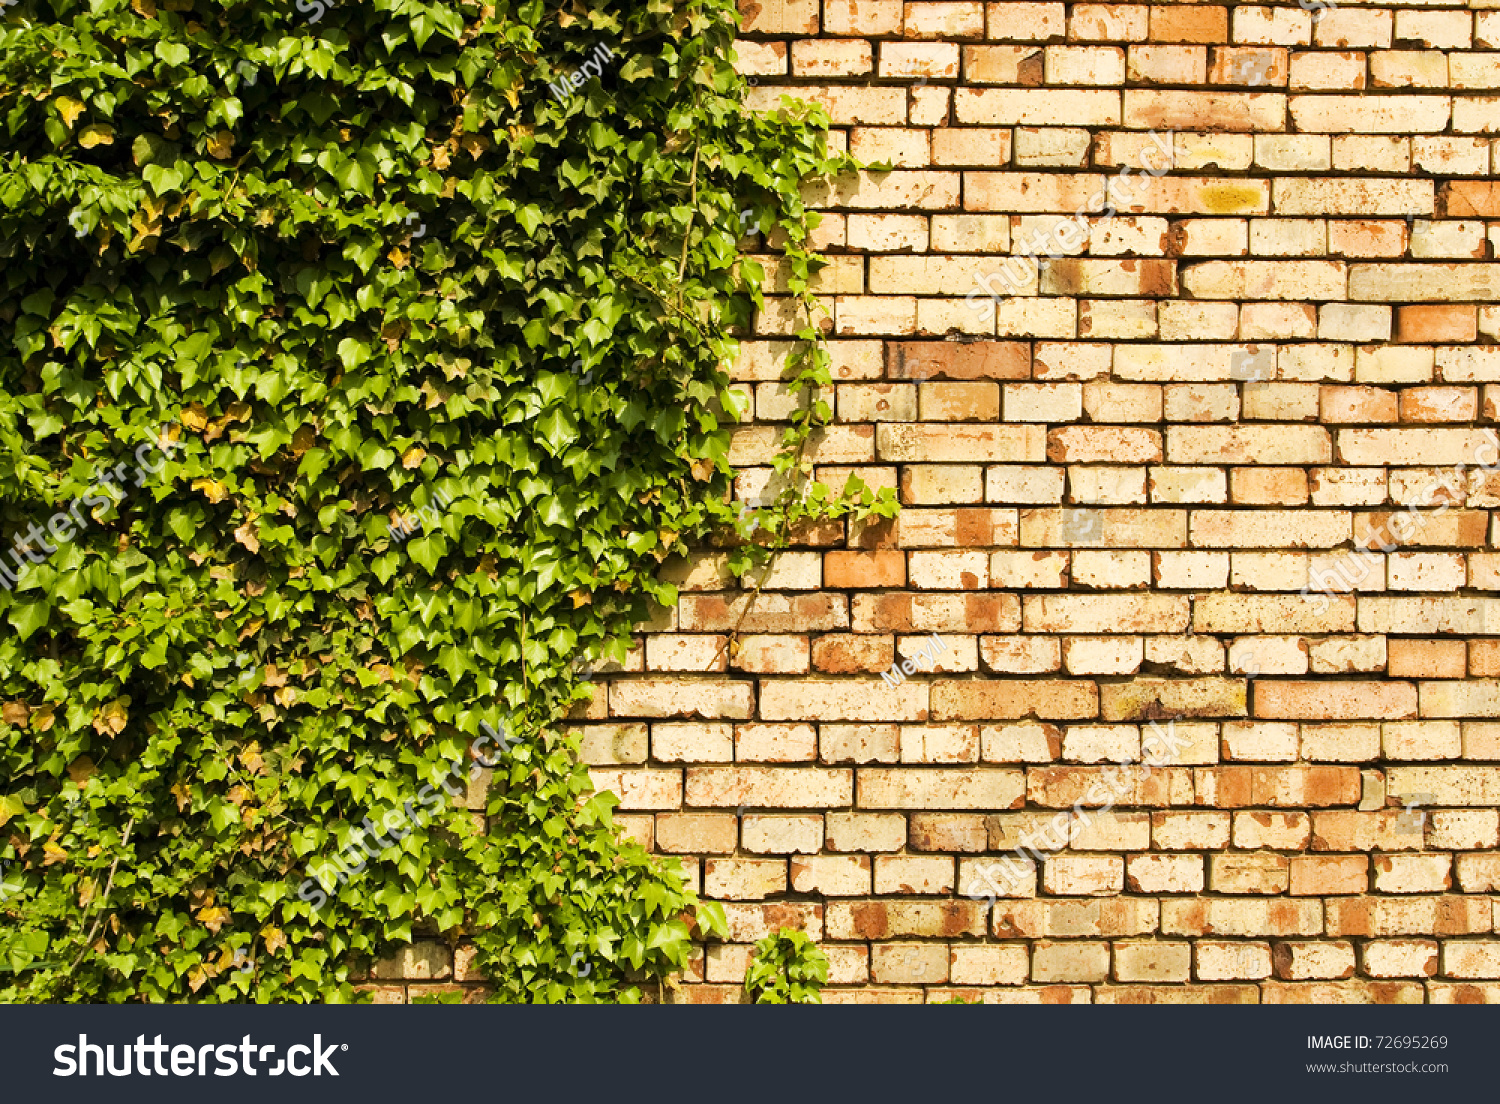 Brick Wall Texture And Green Ivy Leaves Background Stock Photo 72695269 ...